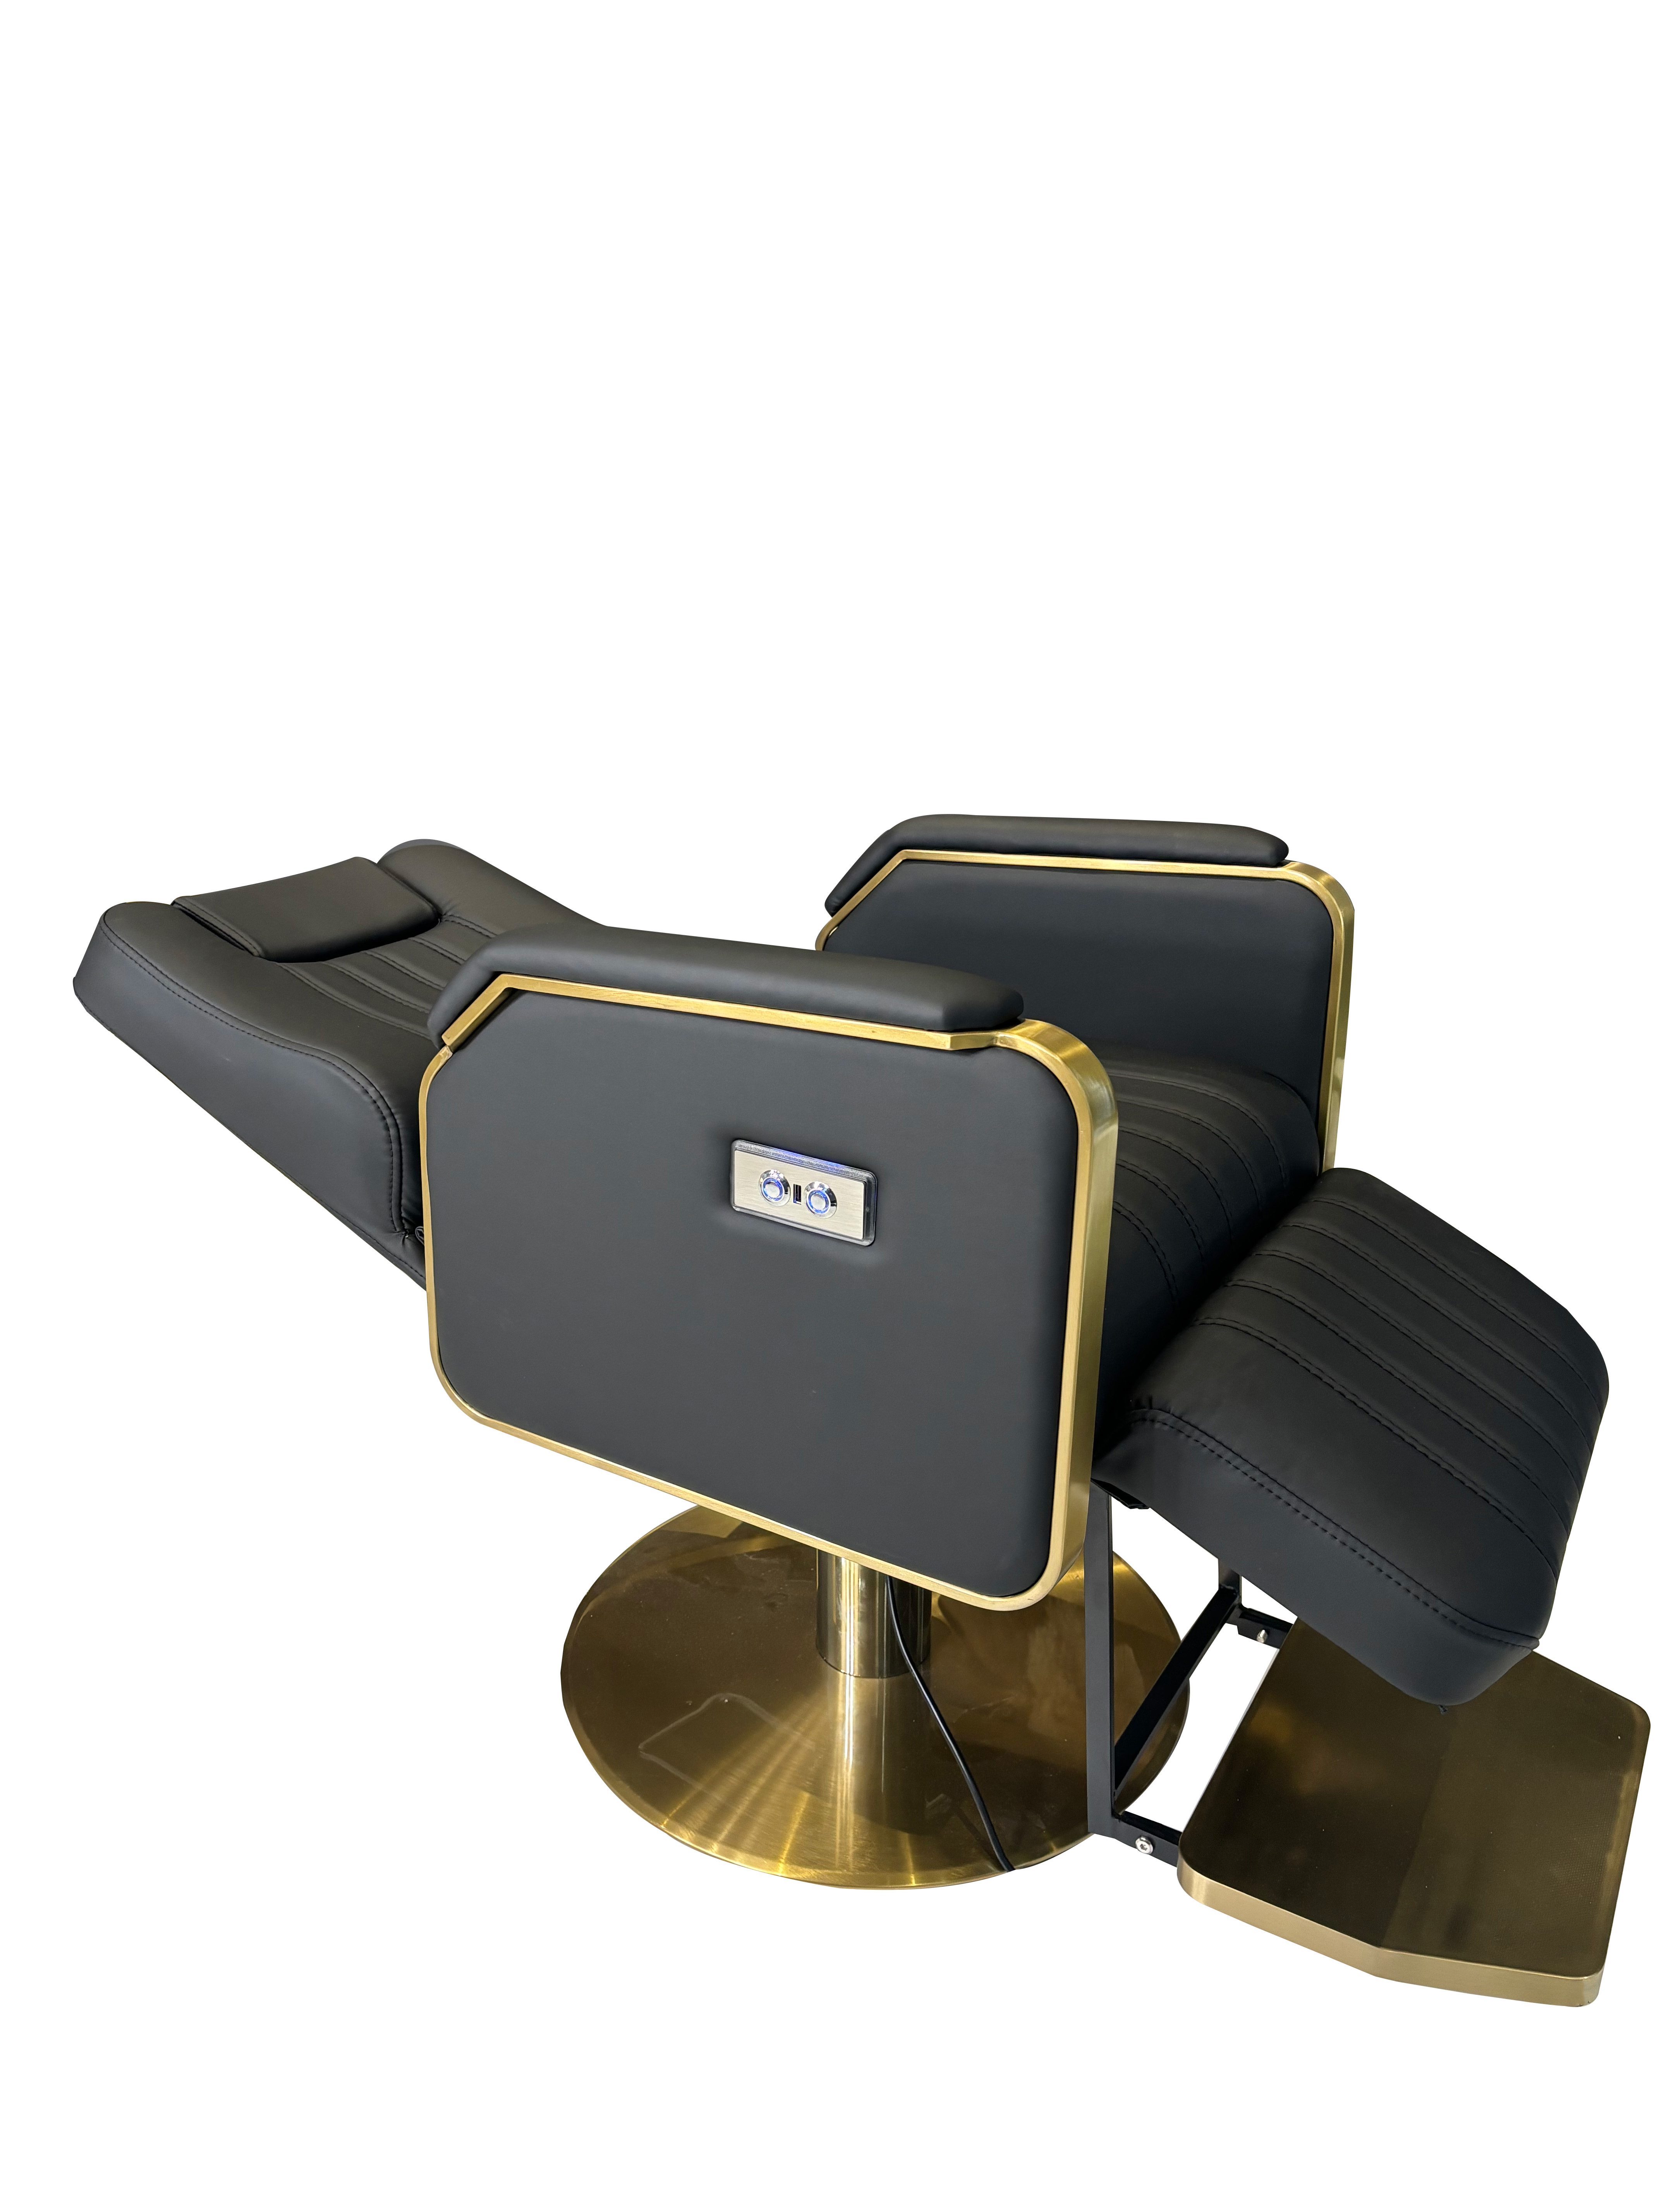 The Hollie Reclining Chair  - Black & Gold By SEC